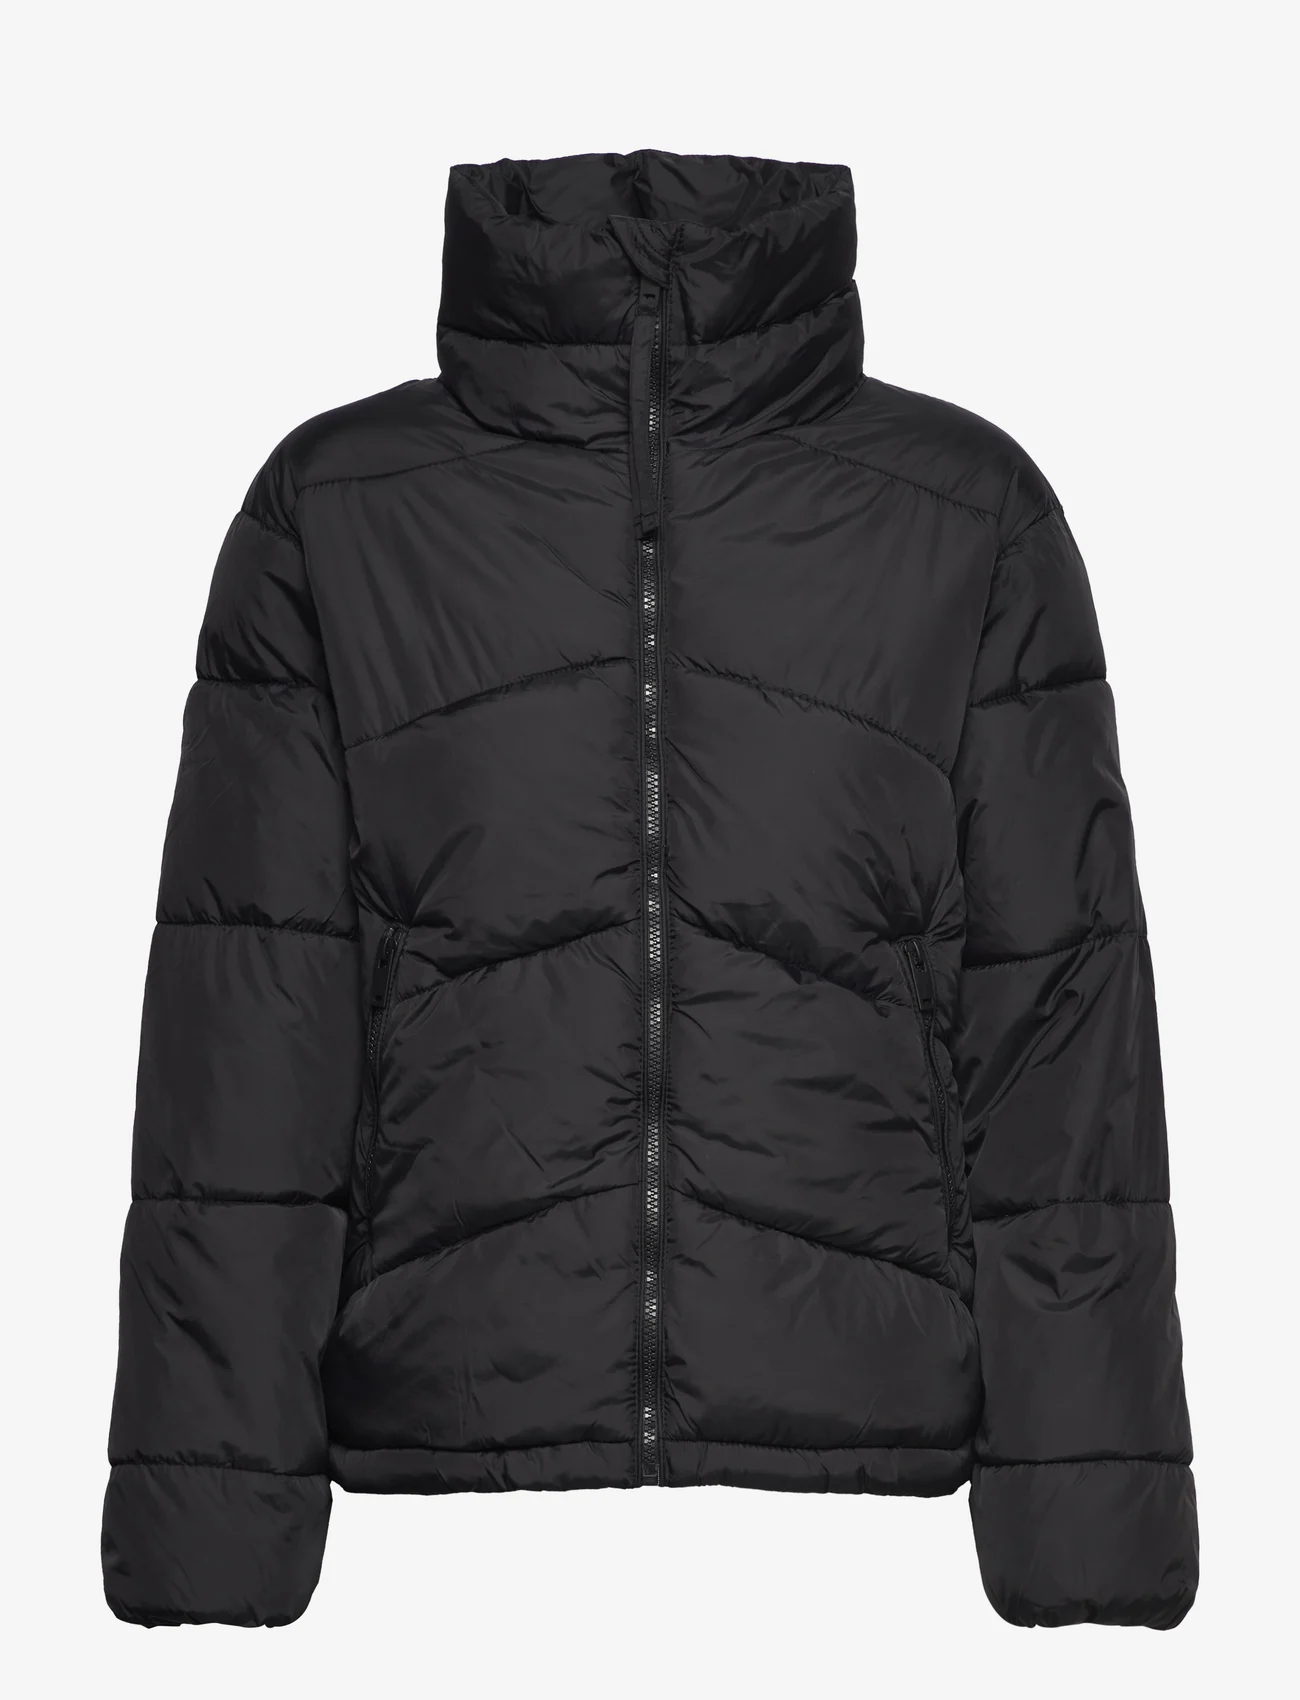 b.young - BYBOMINA PUFFER 2 - winter jackets - black - 0